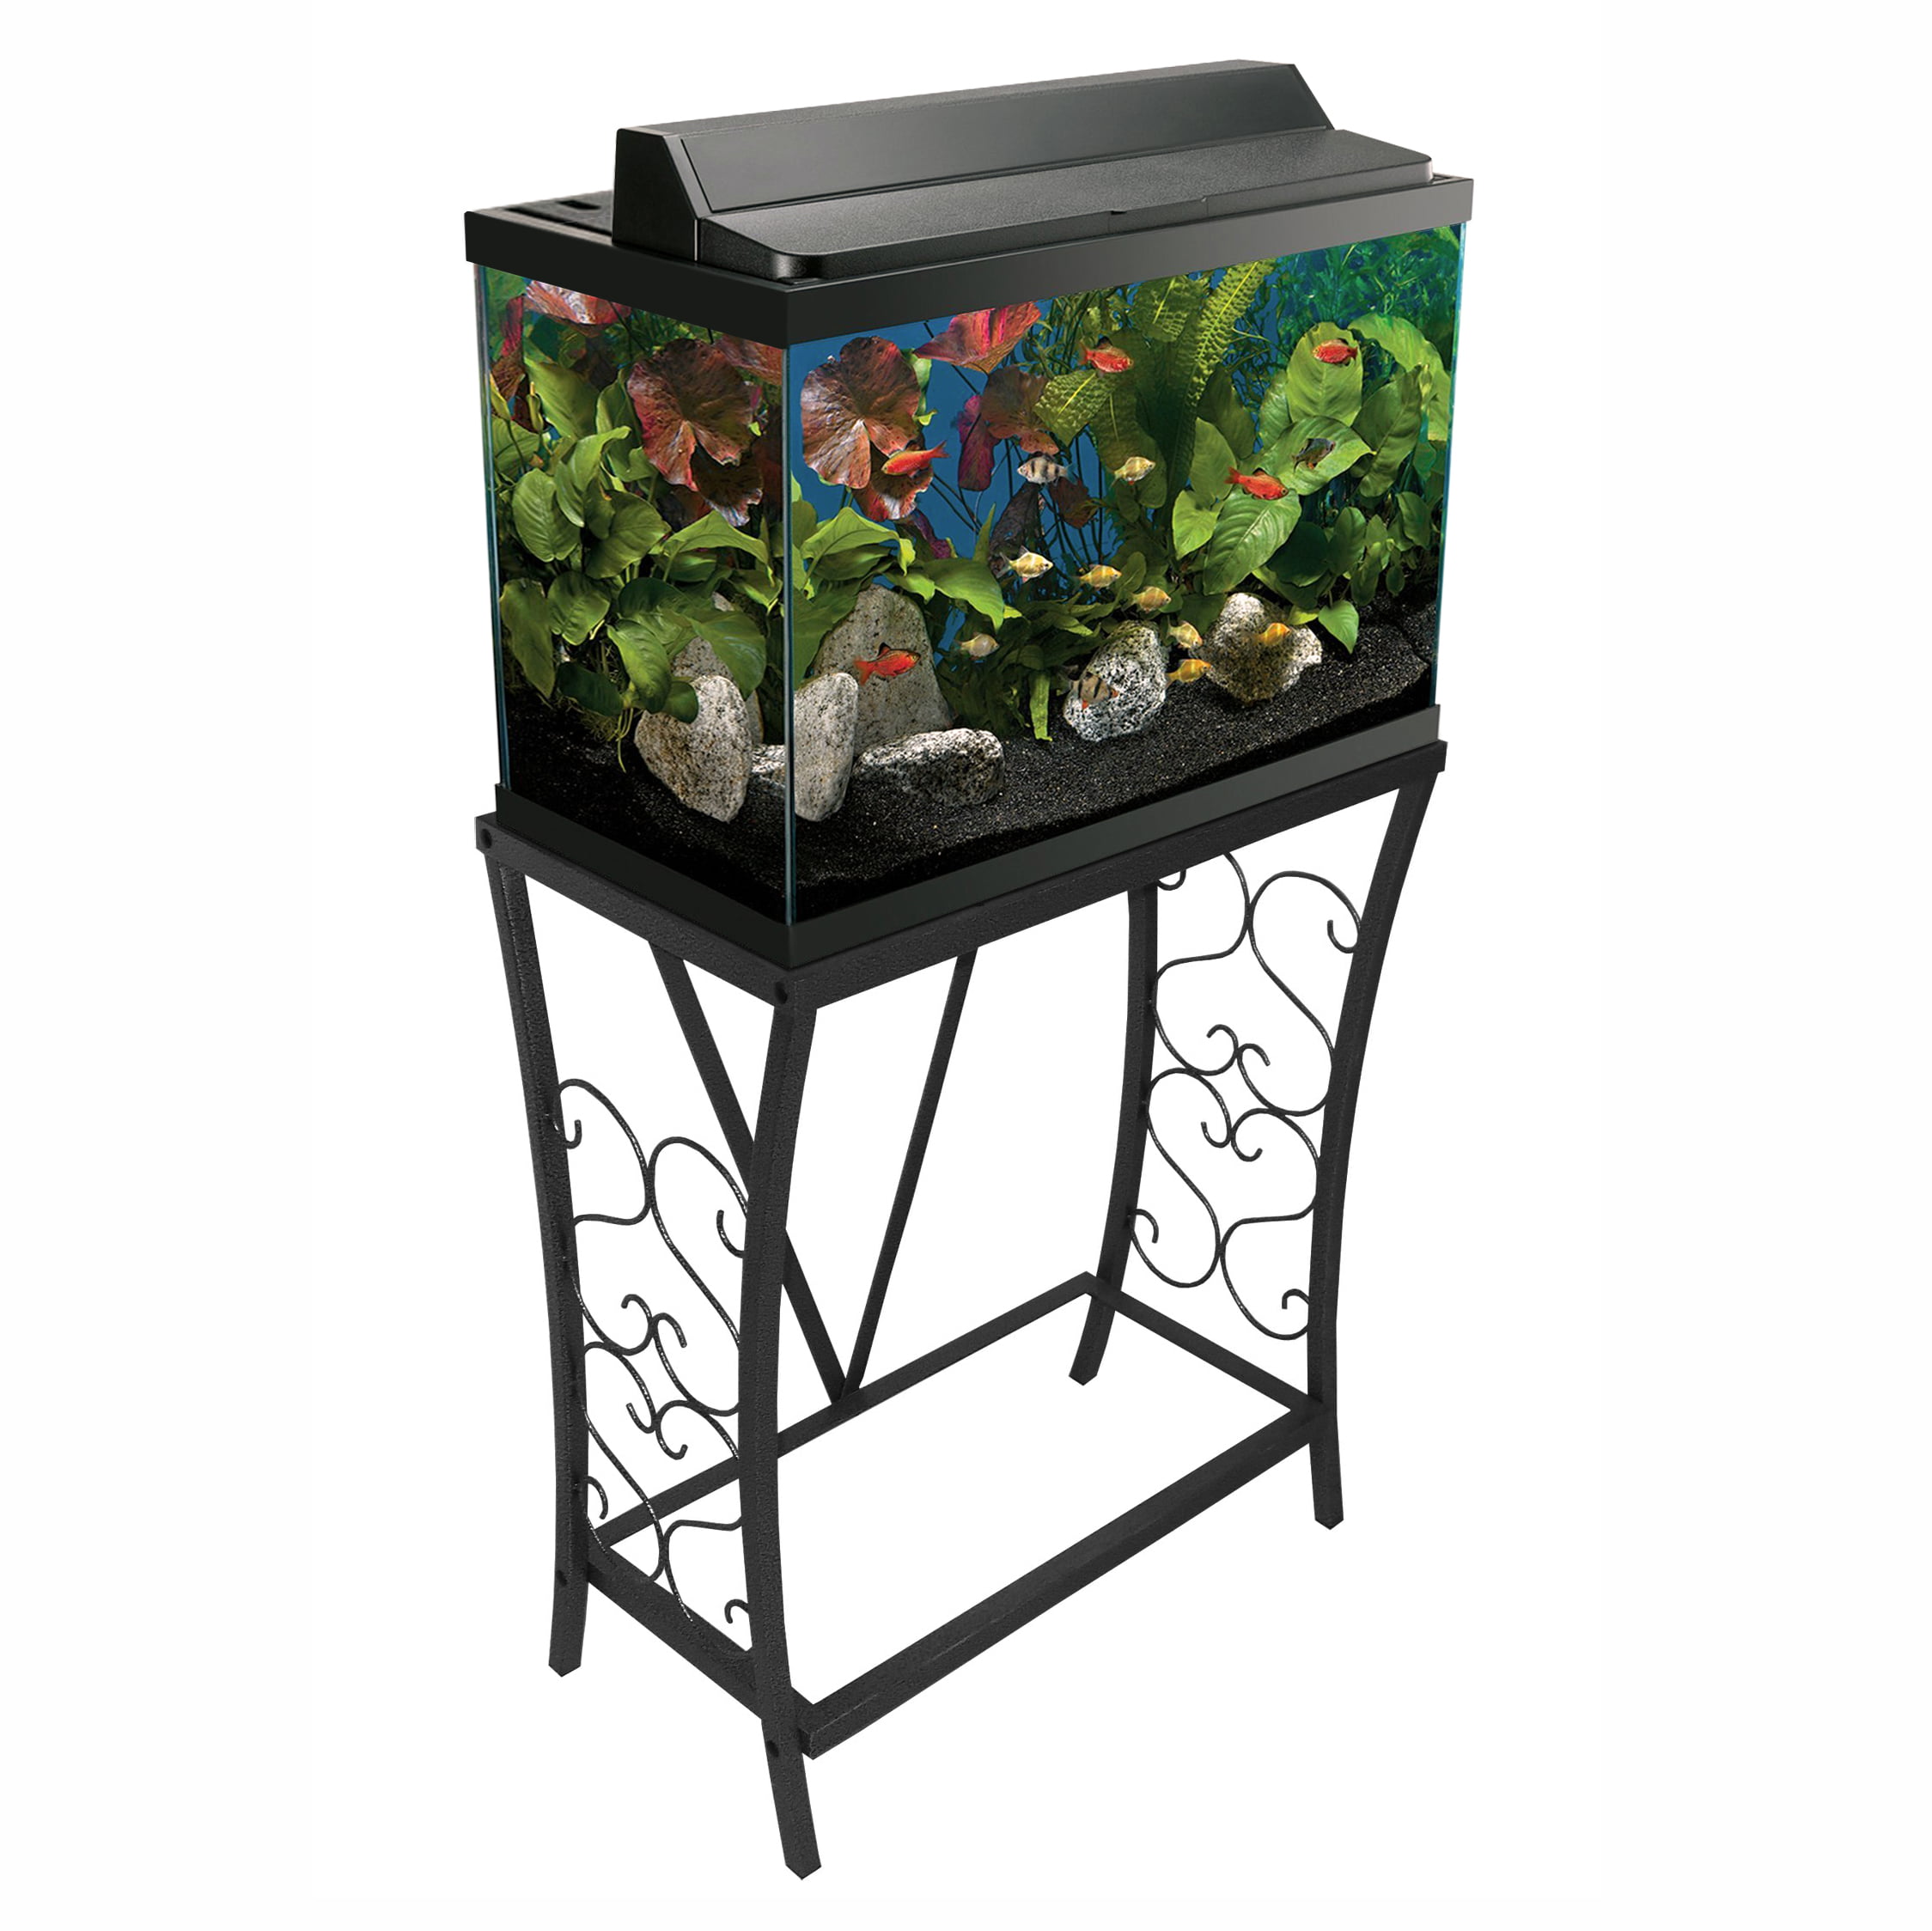 The Appeal of Wrought Iron – My New Aquarium Stand